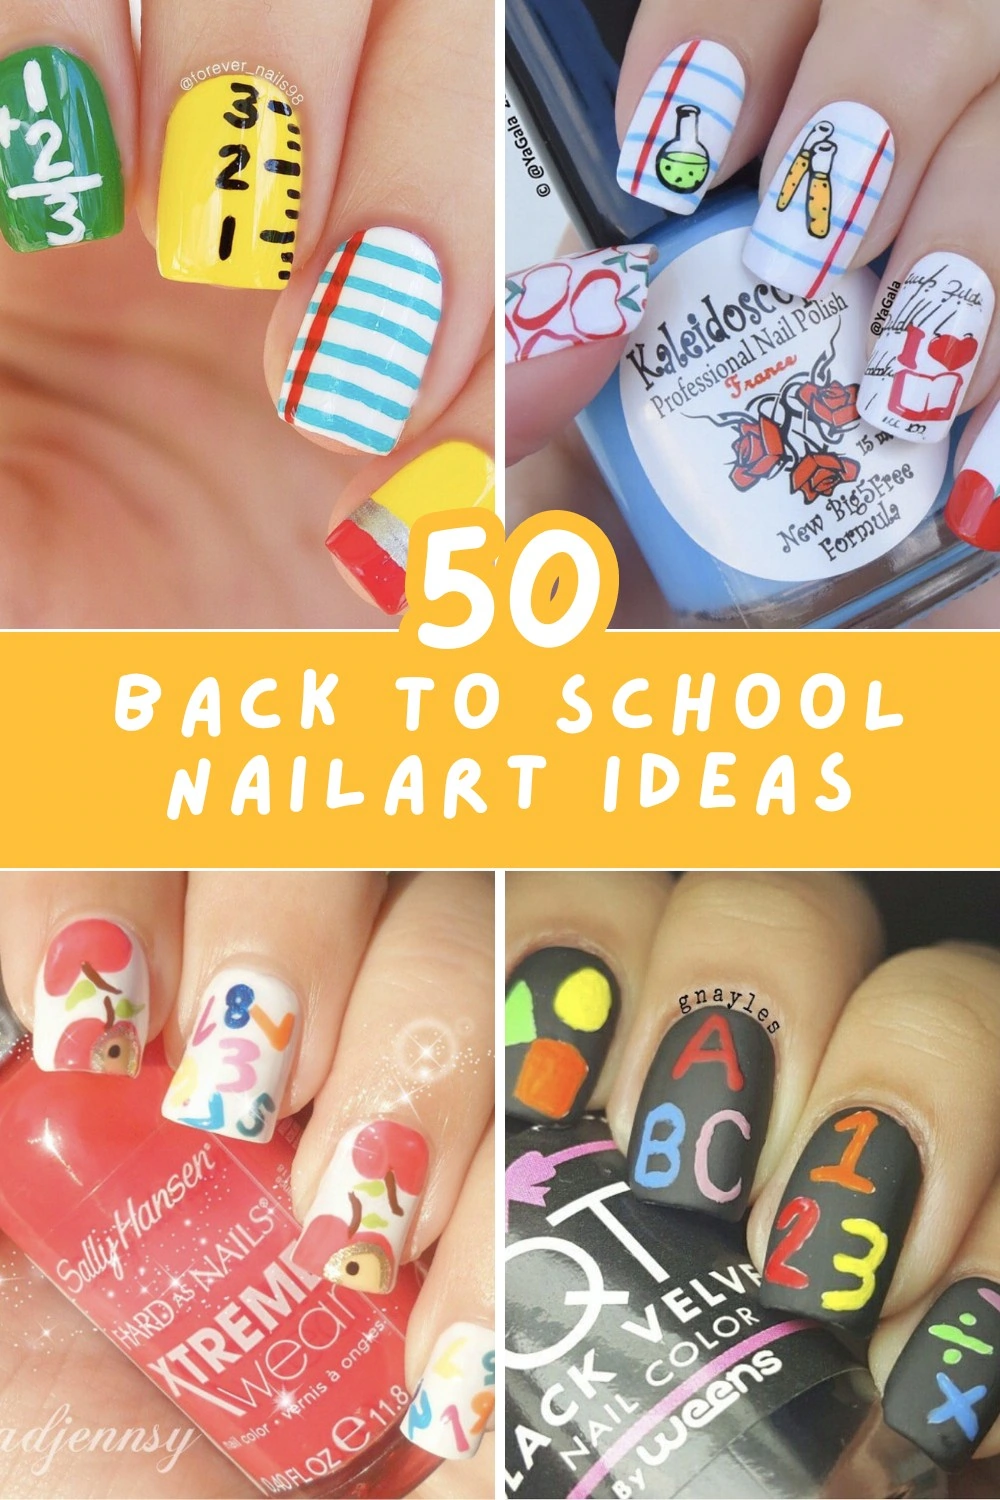 Nail your back to school look with these fabulous designs! From subtle to bold, these ideas are perfect for anyone looking to make a statement. 🌟💅 #SchoolStyle #NailGoals







